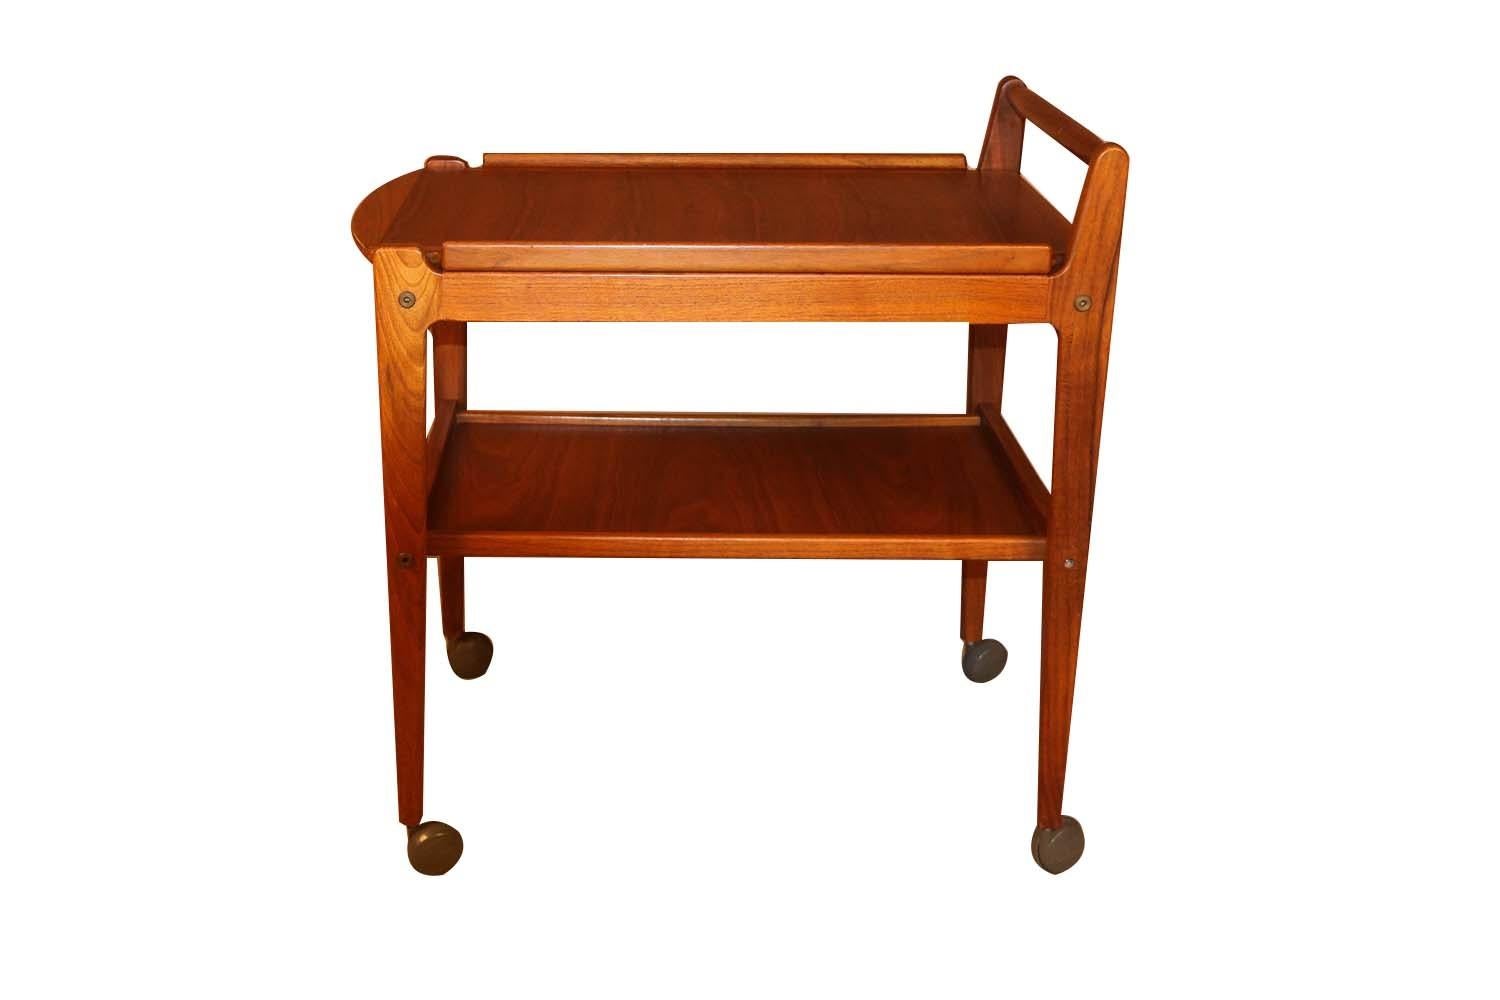 A Classic midcentury bar cart attributed to Erik Gustafsson, crafted in teak solids and veneers. The simple and functional cart often referred to as a “drink trolley”, features a removable molded tray top angled arm and legs over a fixed lower